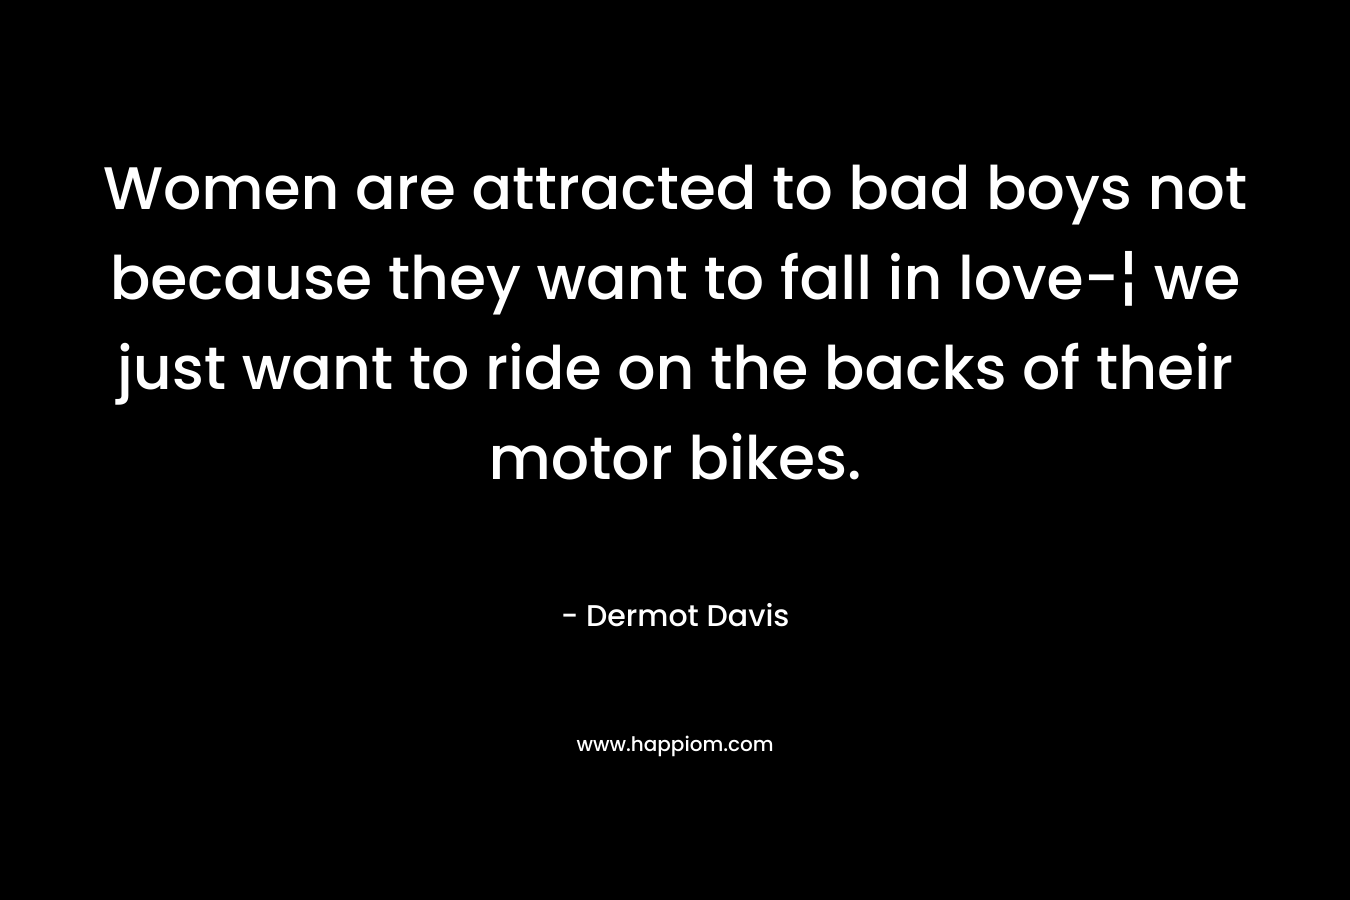 Women are attracted to bad boys not because they want to fall in love-¦ we just want to ride on the backs of their motor bikes.